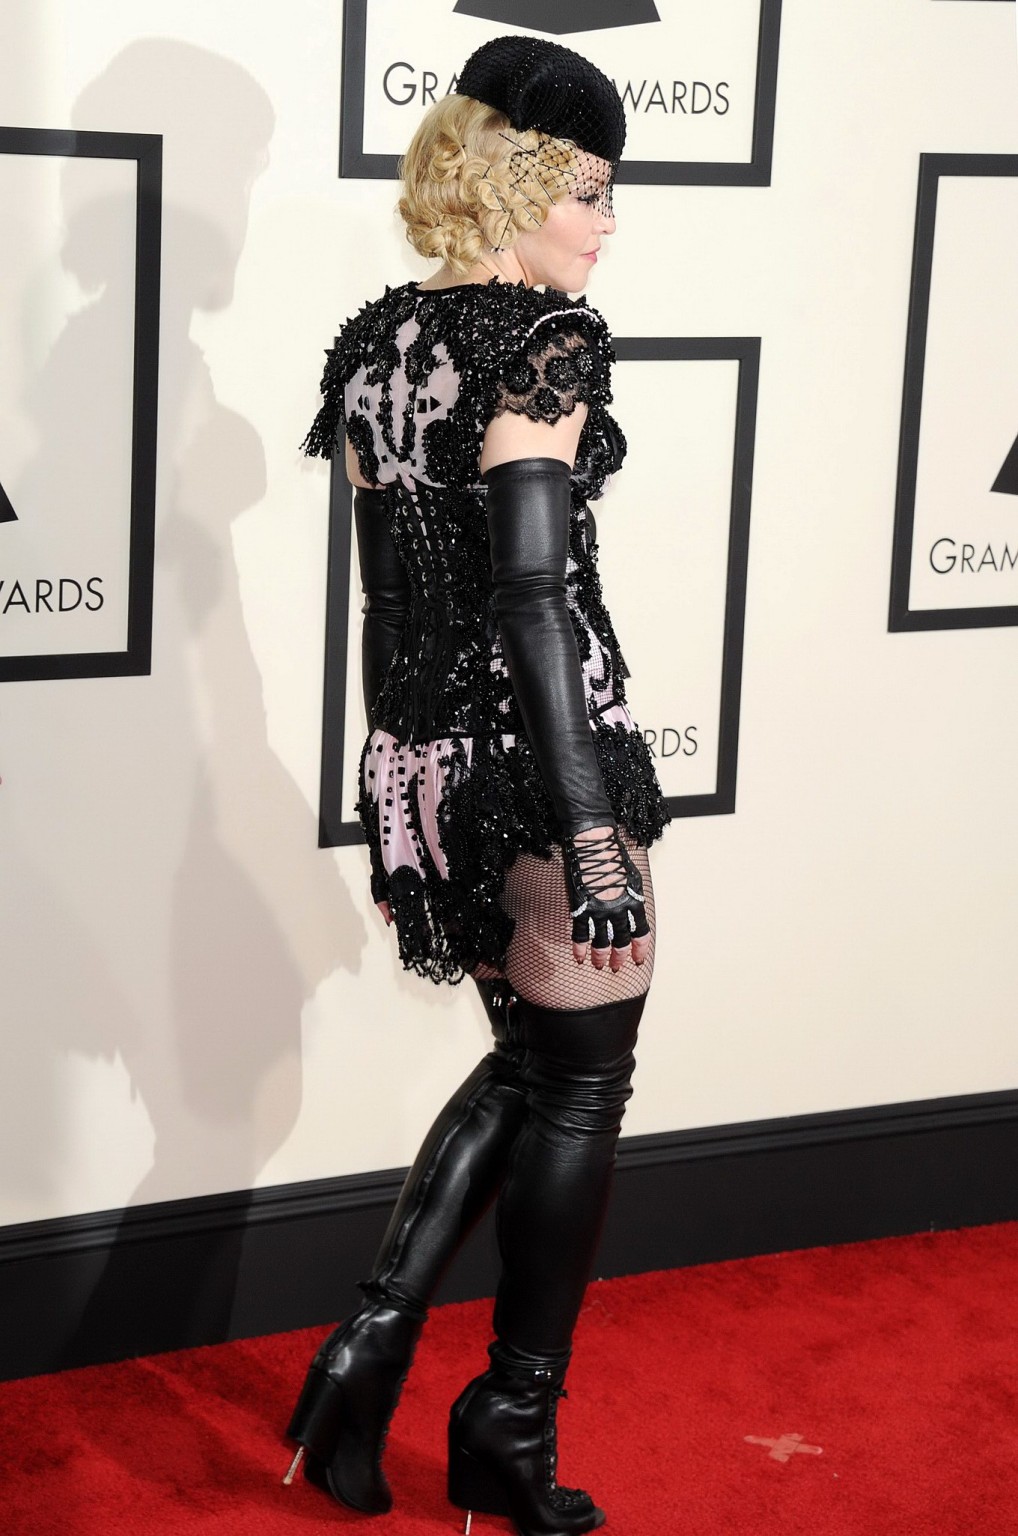 Madonna cleavy wearing a slutty outfit at the 57th Annual GRAMMY Awards in LA #75173076